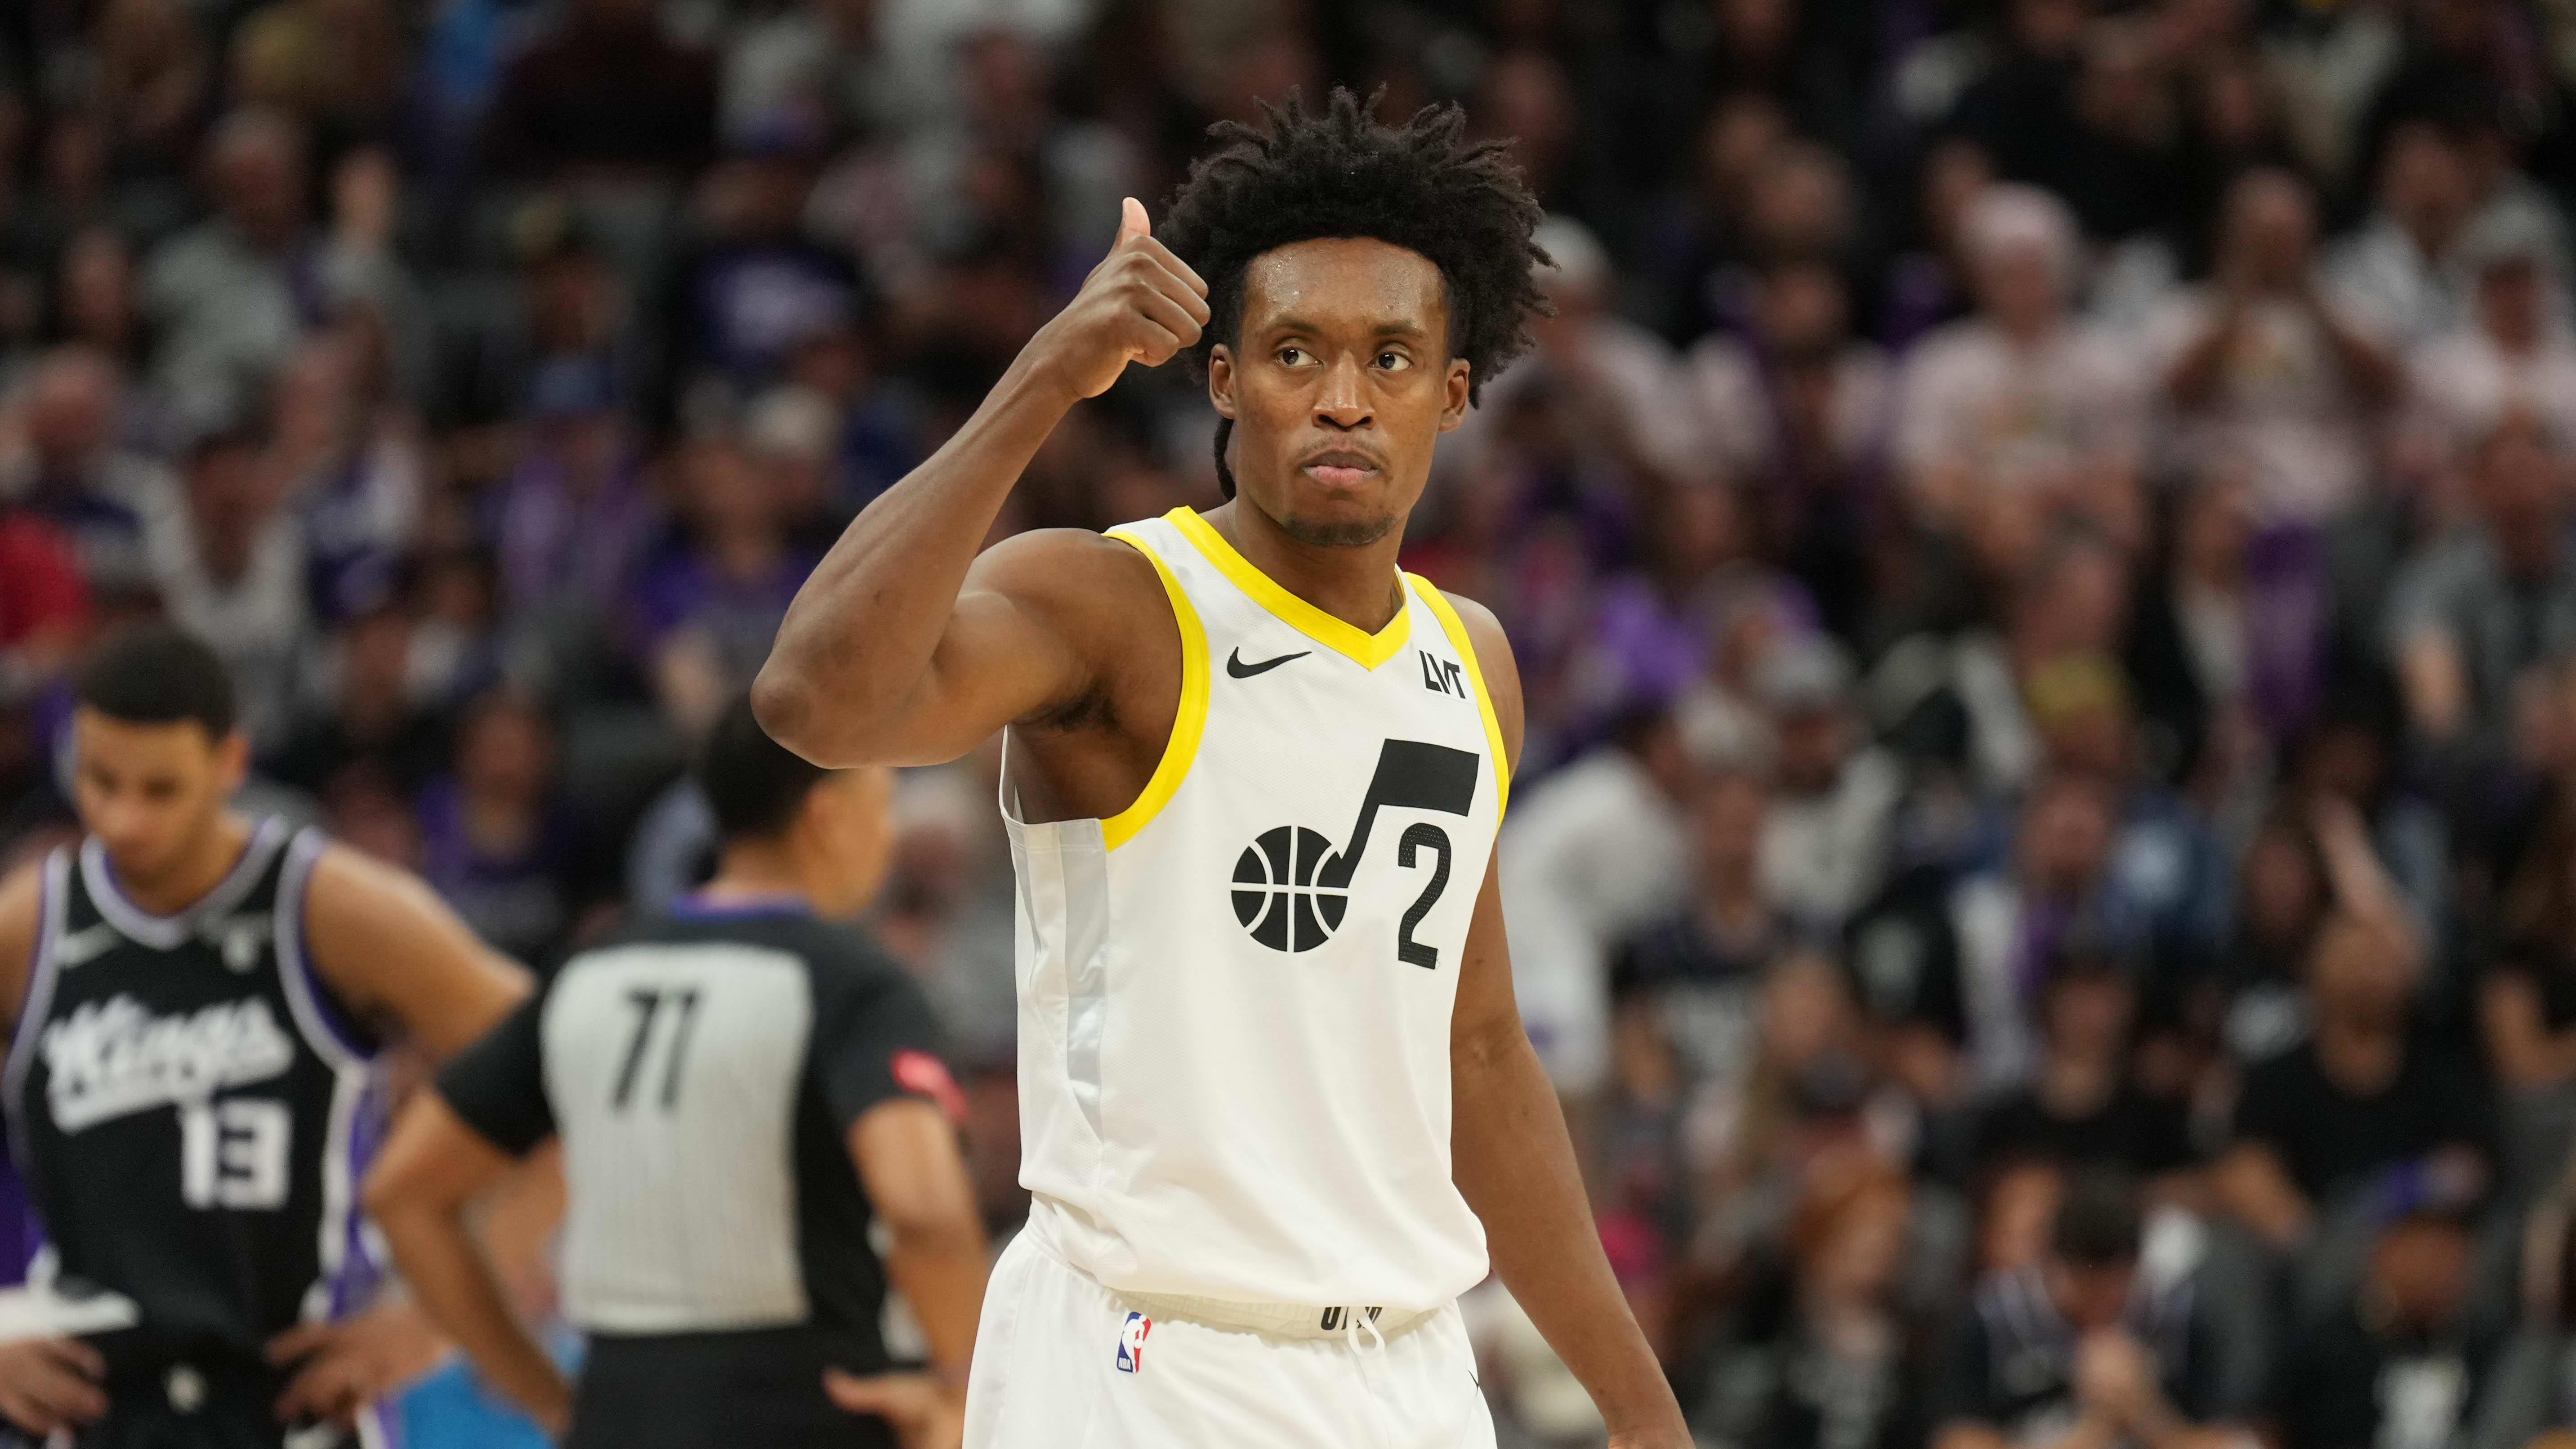 Collin Sexton Breakout Season Grades with Jazz: A- Rating & Top Play Stats